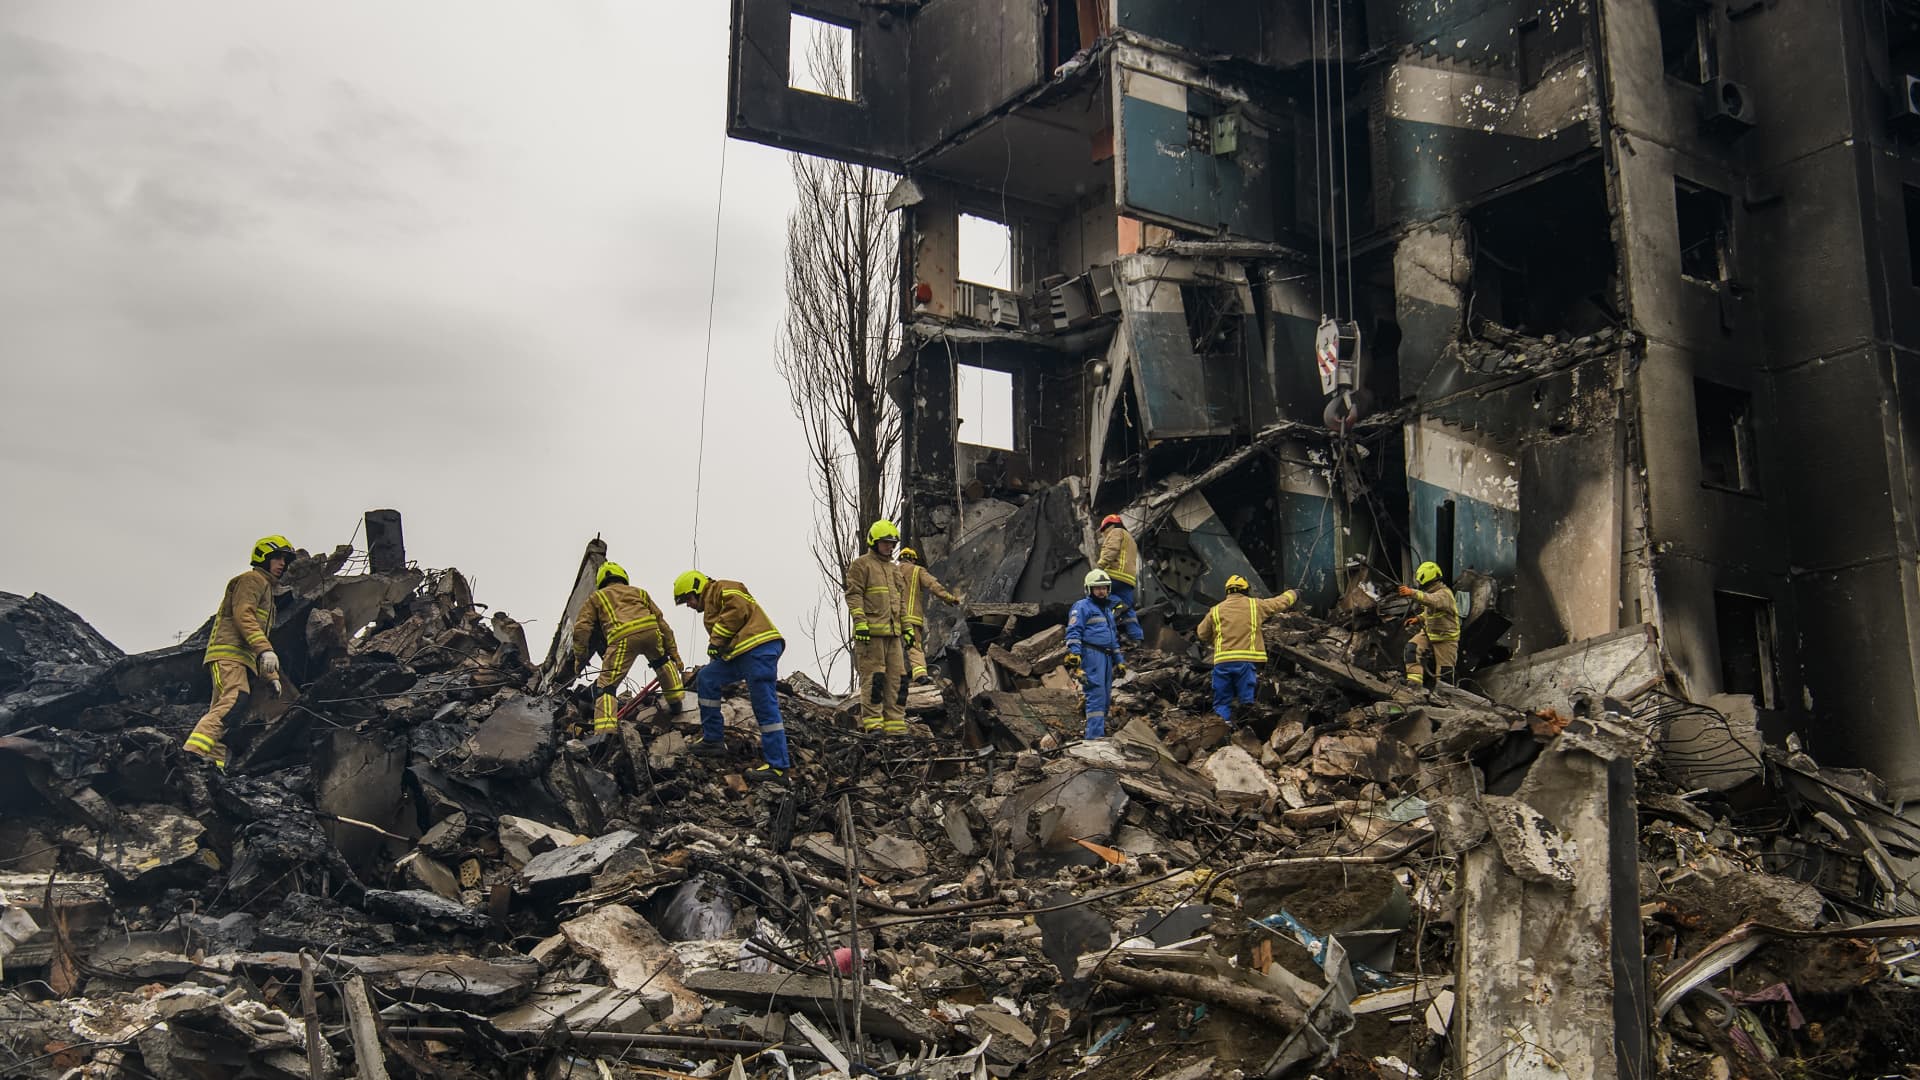 Ukrainian Rescuers worked to clear the rubble after the collapse of buildings destroyed by russian army in Borodyanka city near Kyiv, Ukraine, 09 April 2022.